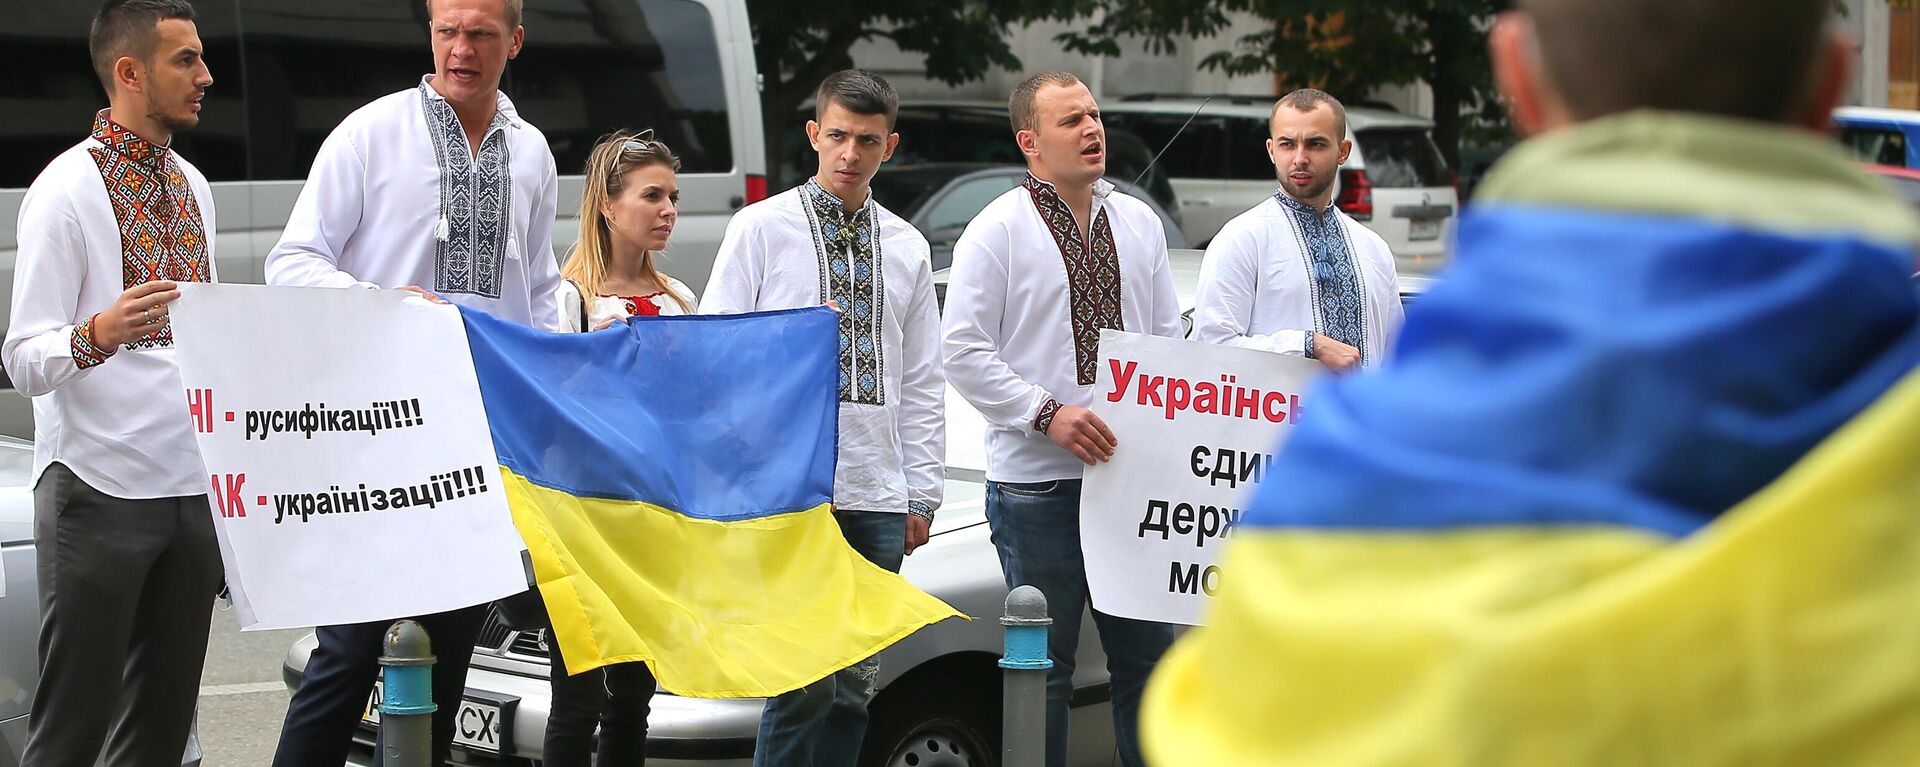 Demonstration by Ukranian nationalists before the Constitutional Court during debate on the Language Law. 2020. - Sputnik International, 1920, 12.06.2022